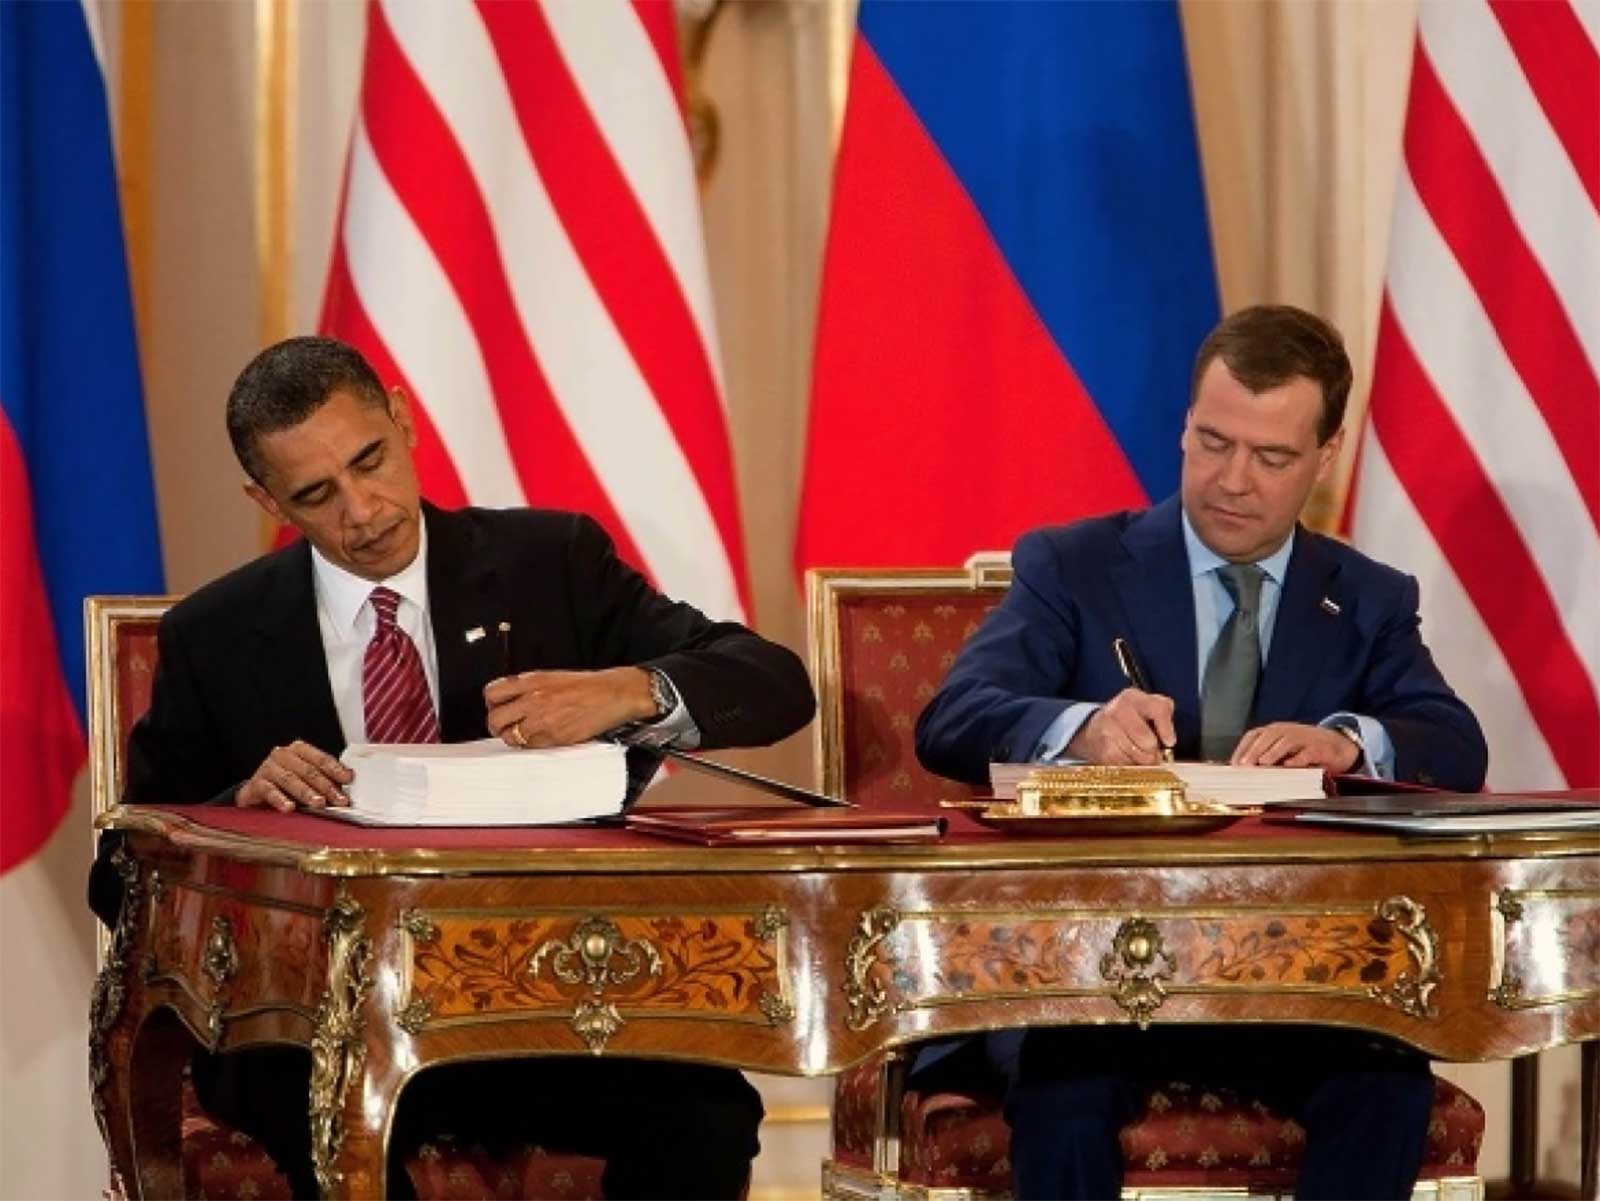 Presidents Obama and Medvedev after signing the Prague Treaty.